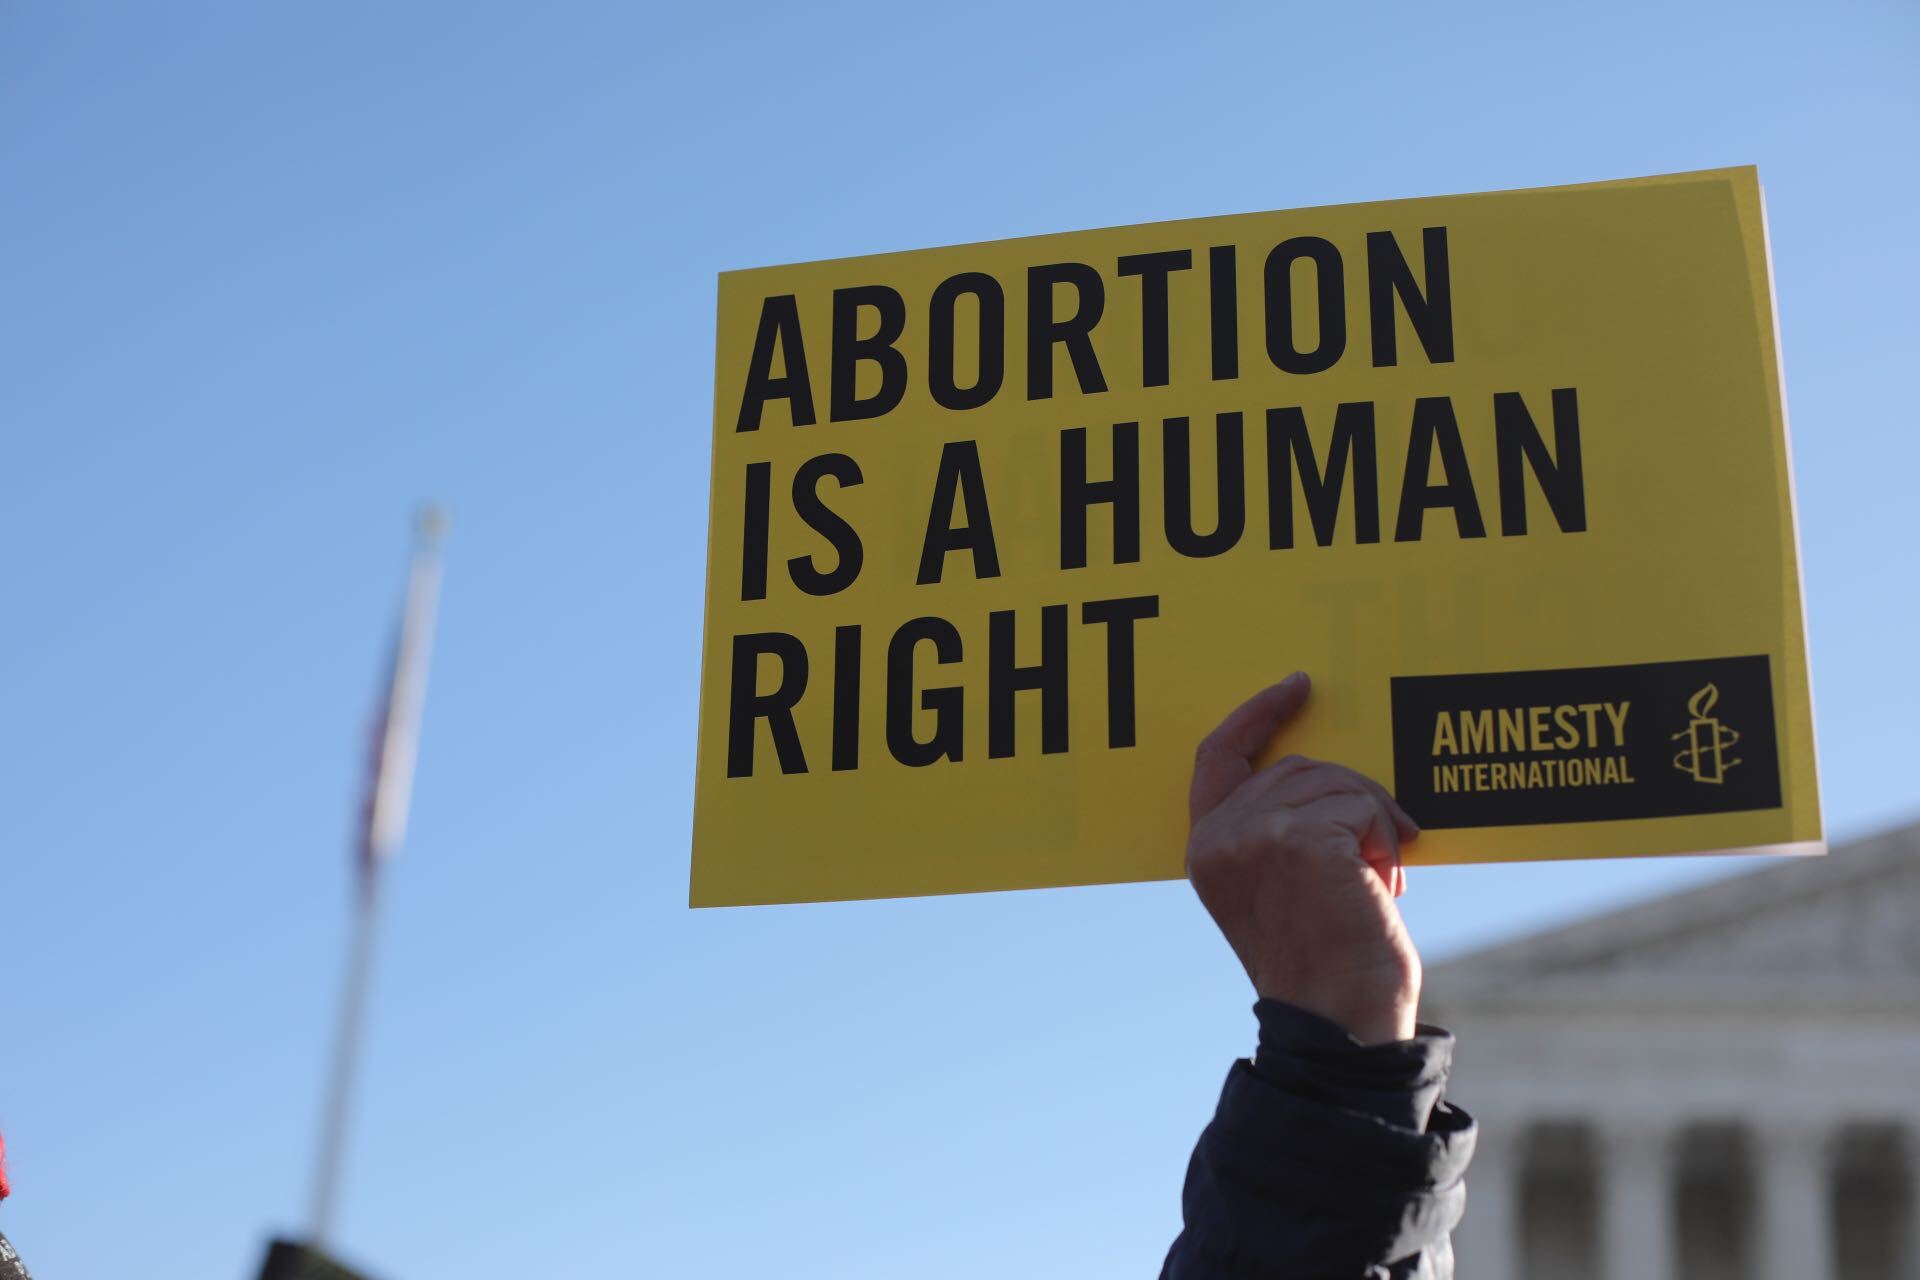 USA: Stop the abortion bans and protect the right to abortion care